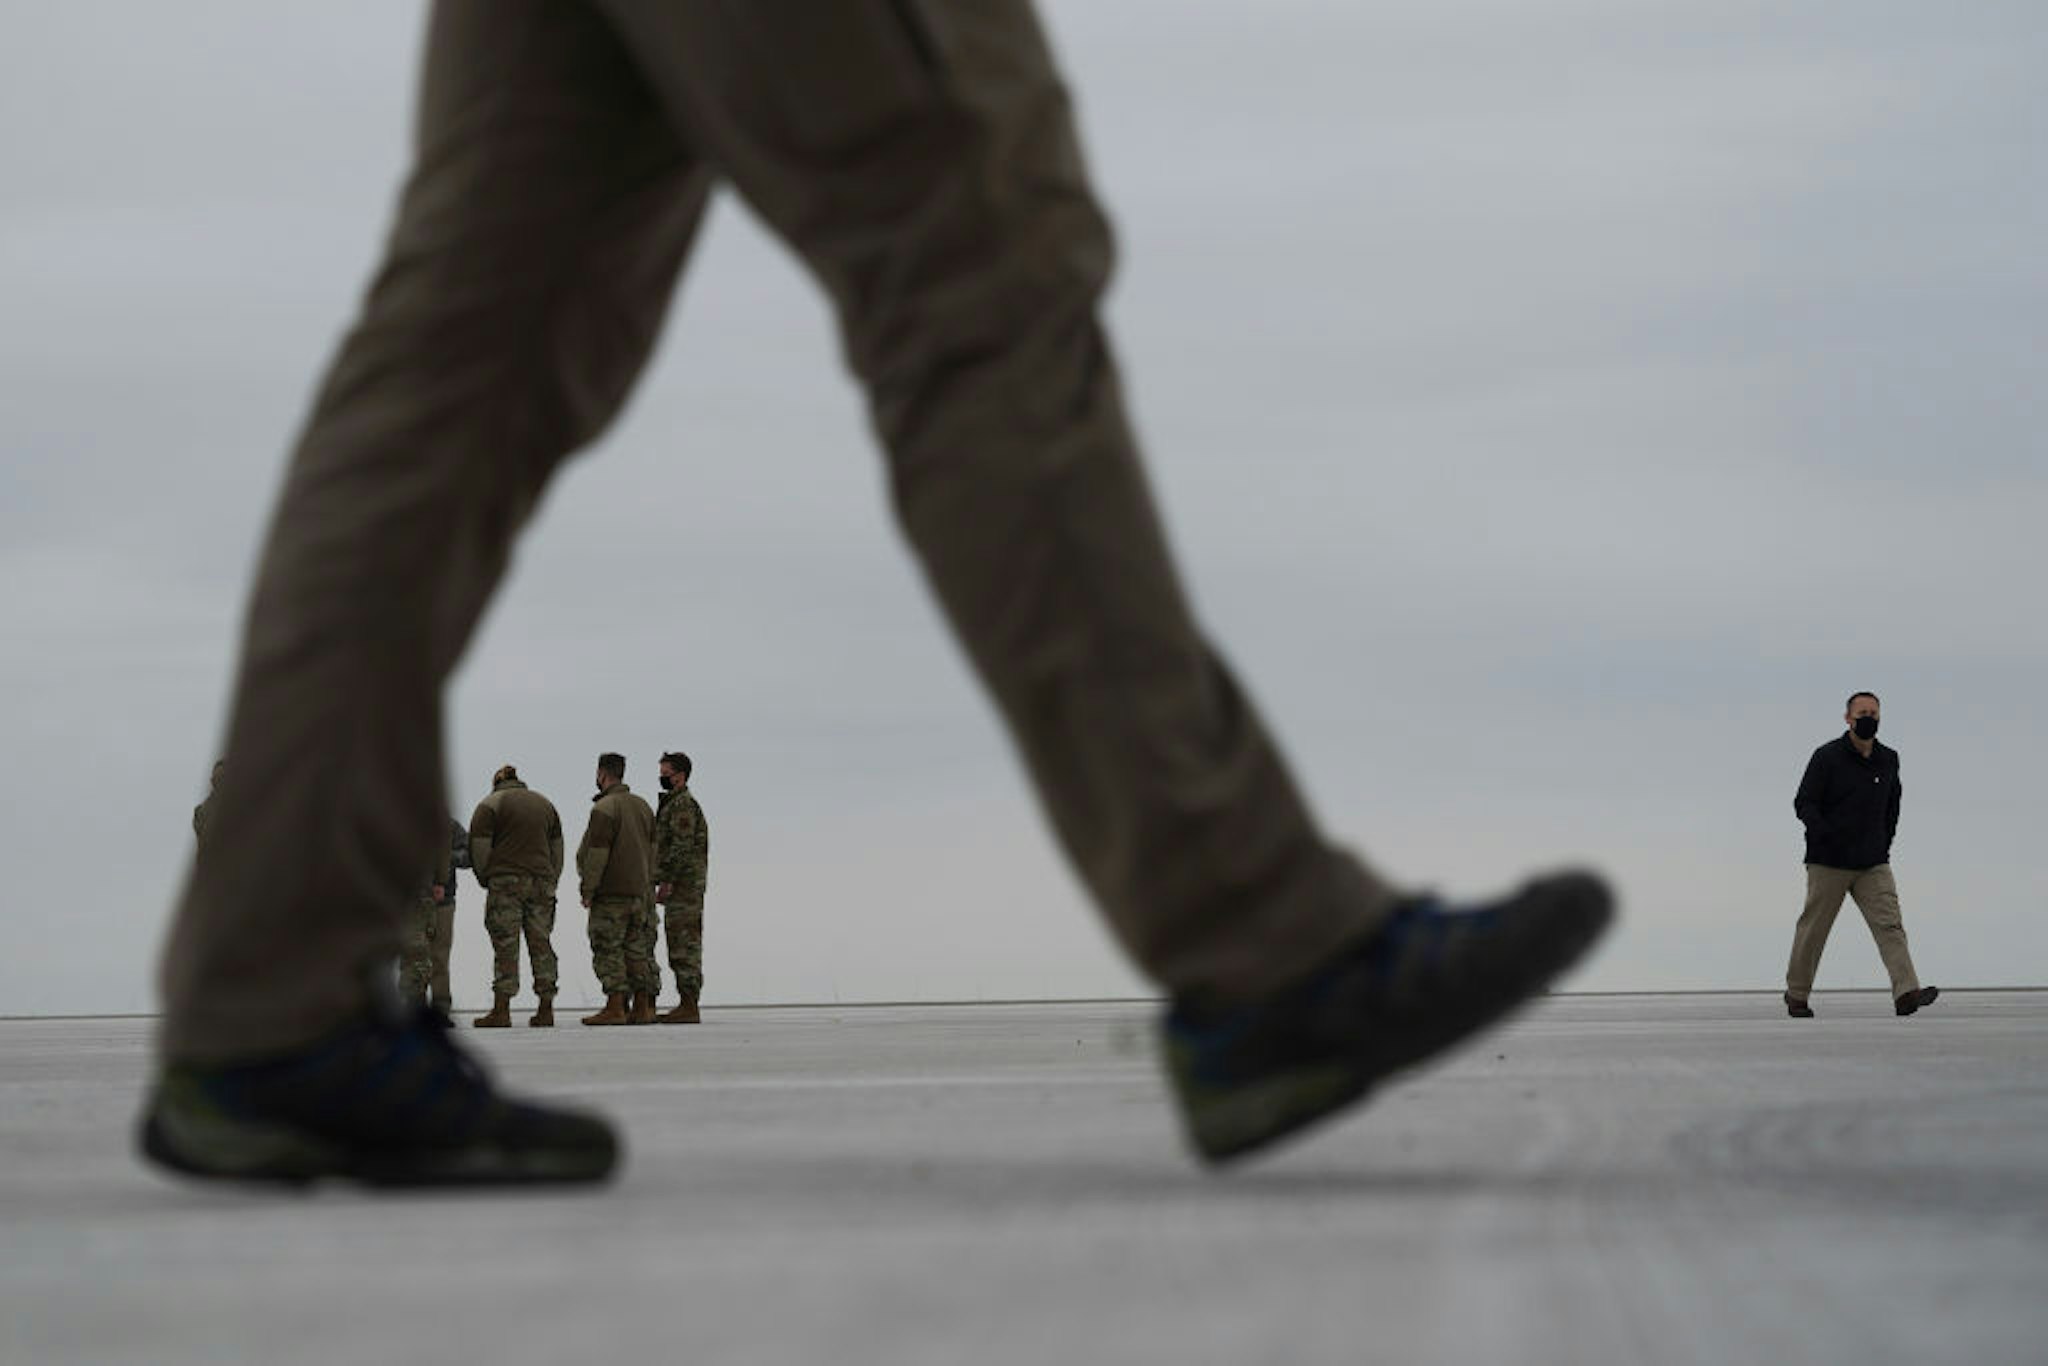 HARLINGEN, TX - JANUARY 12: U.S. Air Force personnel stand guard as Marine Helicopter Squadron One lands at Valley International Airport on January 12, 2021 in Harlingen, Texas. President Donald Trump later delivered remarks during a visit to the U.S.-Mexico Border in Alamo, Texas. (Photo by Go Nakamura/Getty Images)